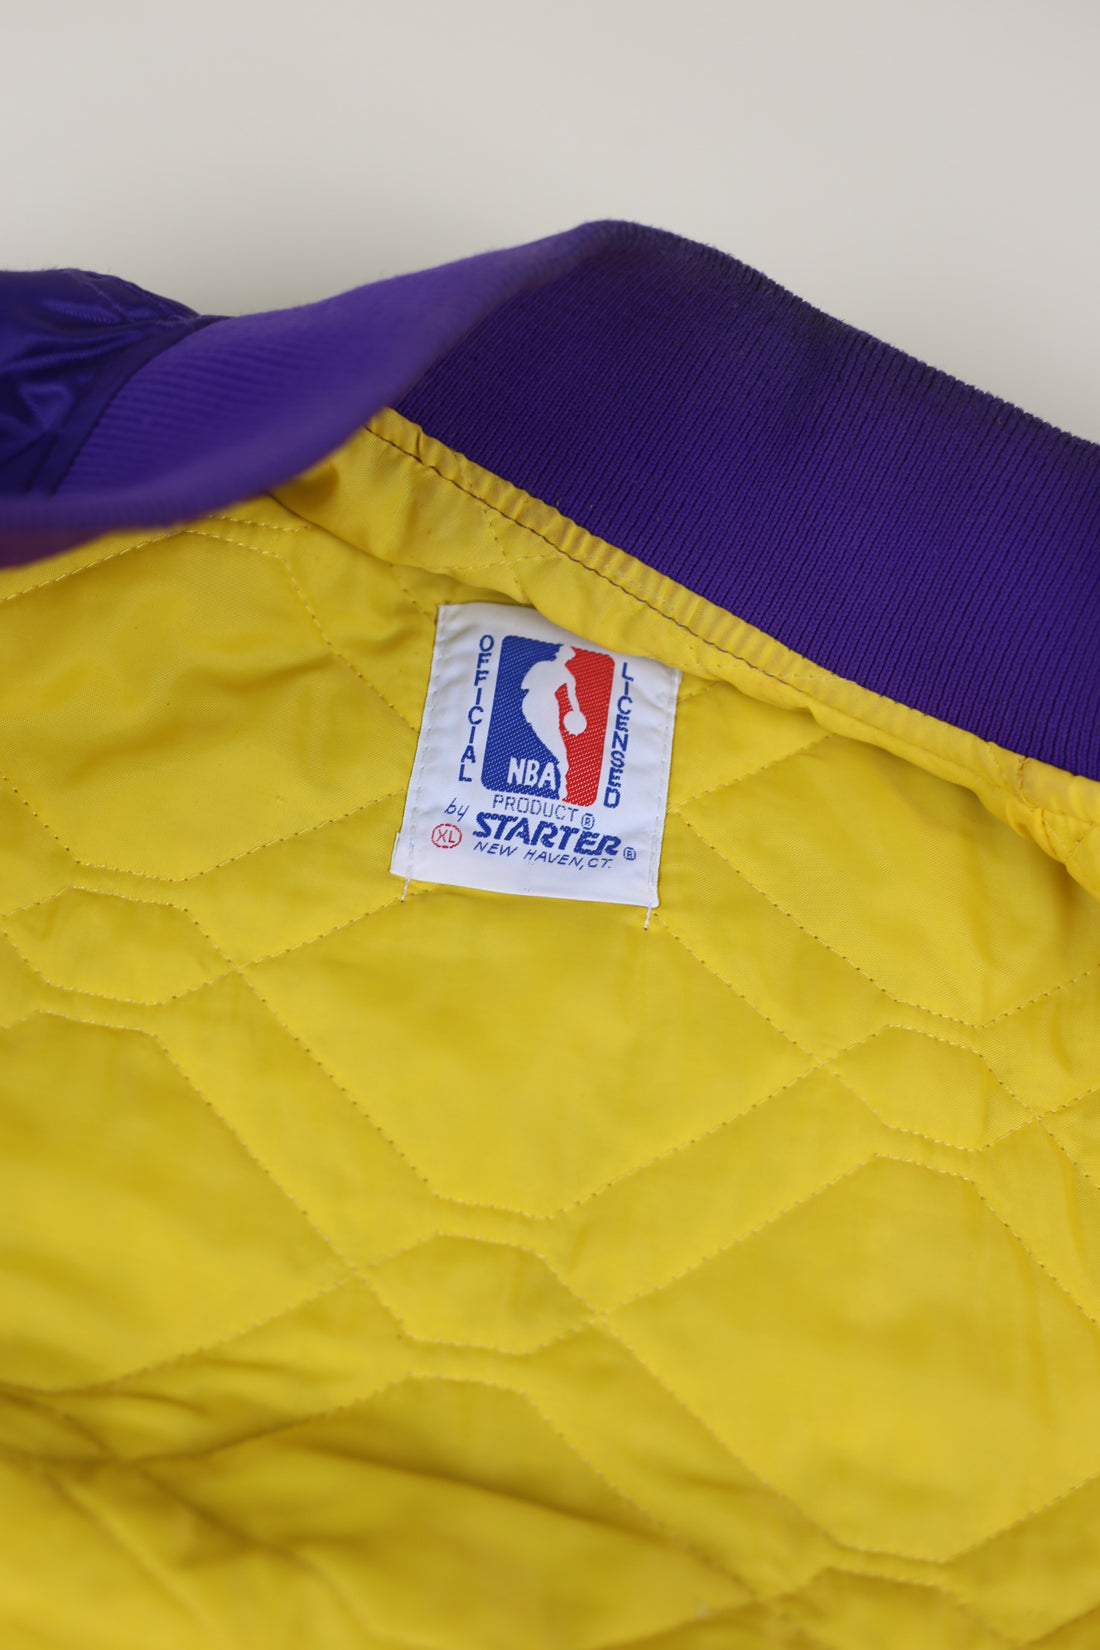 VARSITY STARTER LAKERS JACKET MADE IN USA - XL -